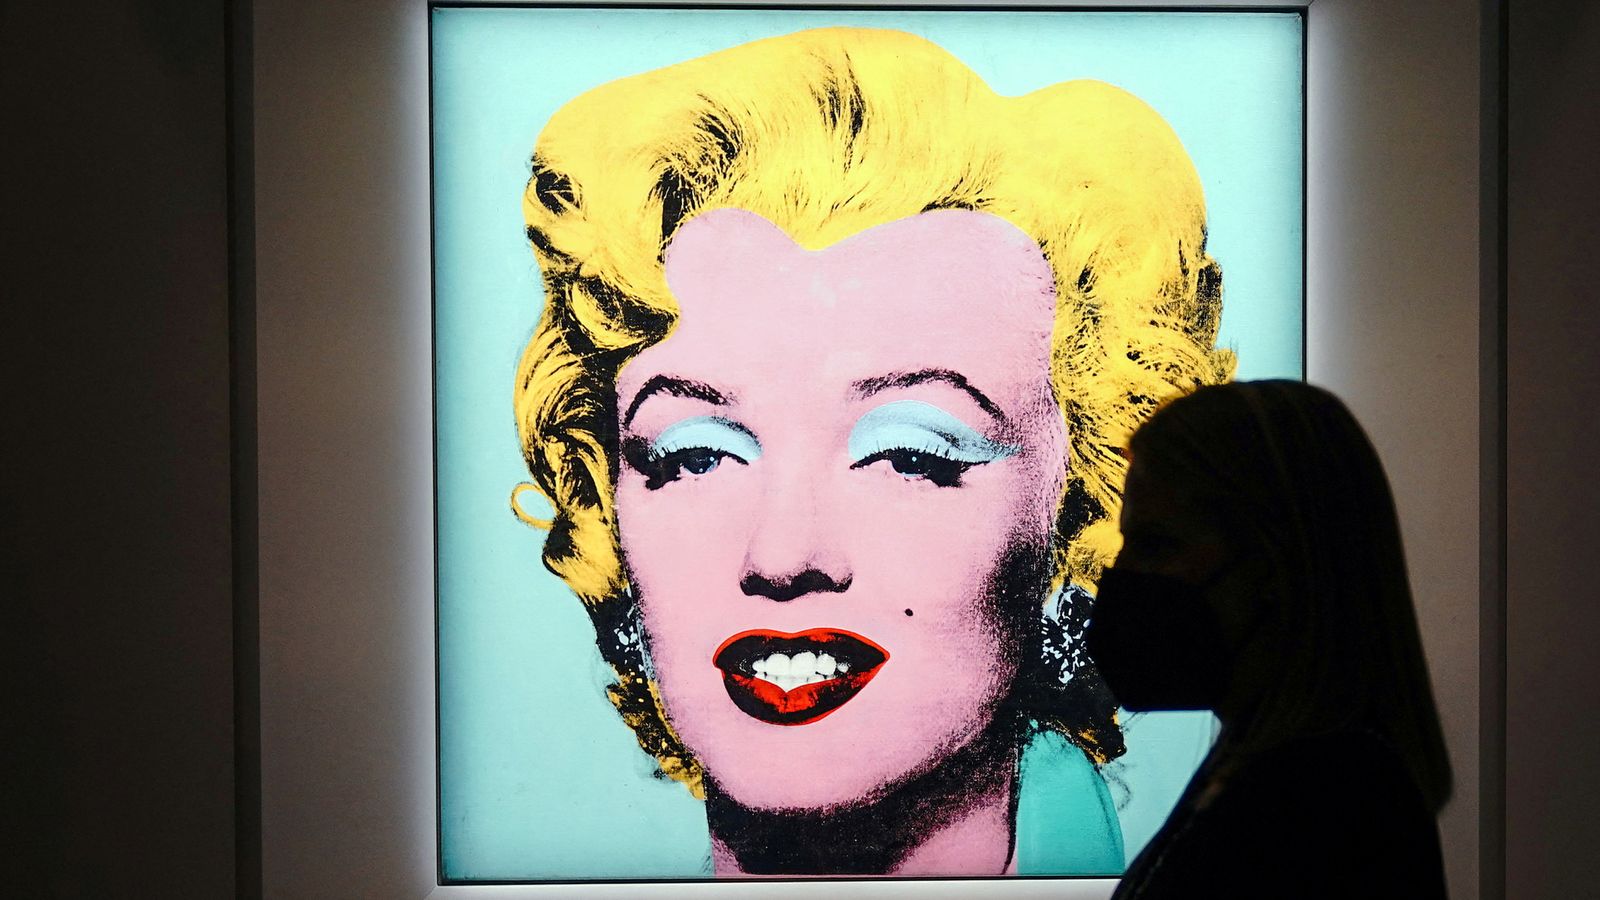 Warhol's Shot Sage Blue Marilyn could become the most expensive 20th  century artwork ever auctioned | Ents & Arts News | Sky News